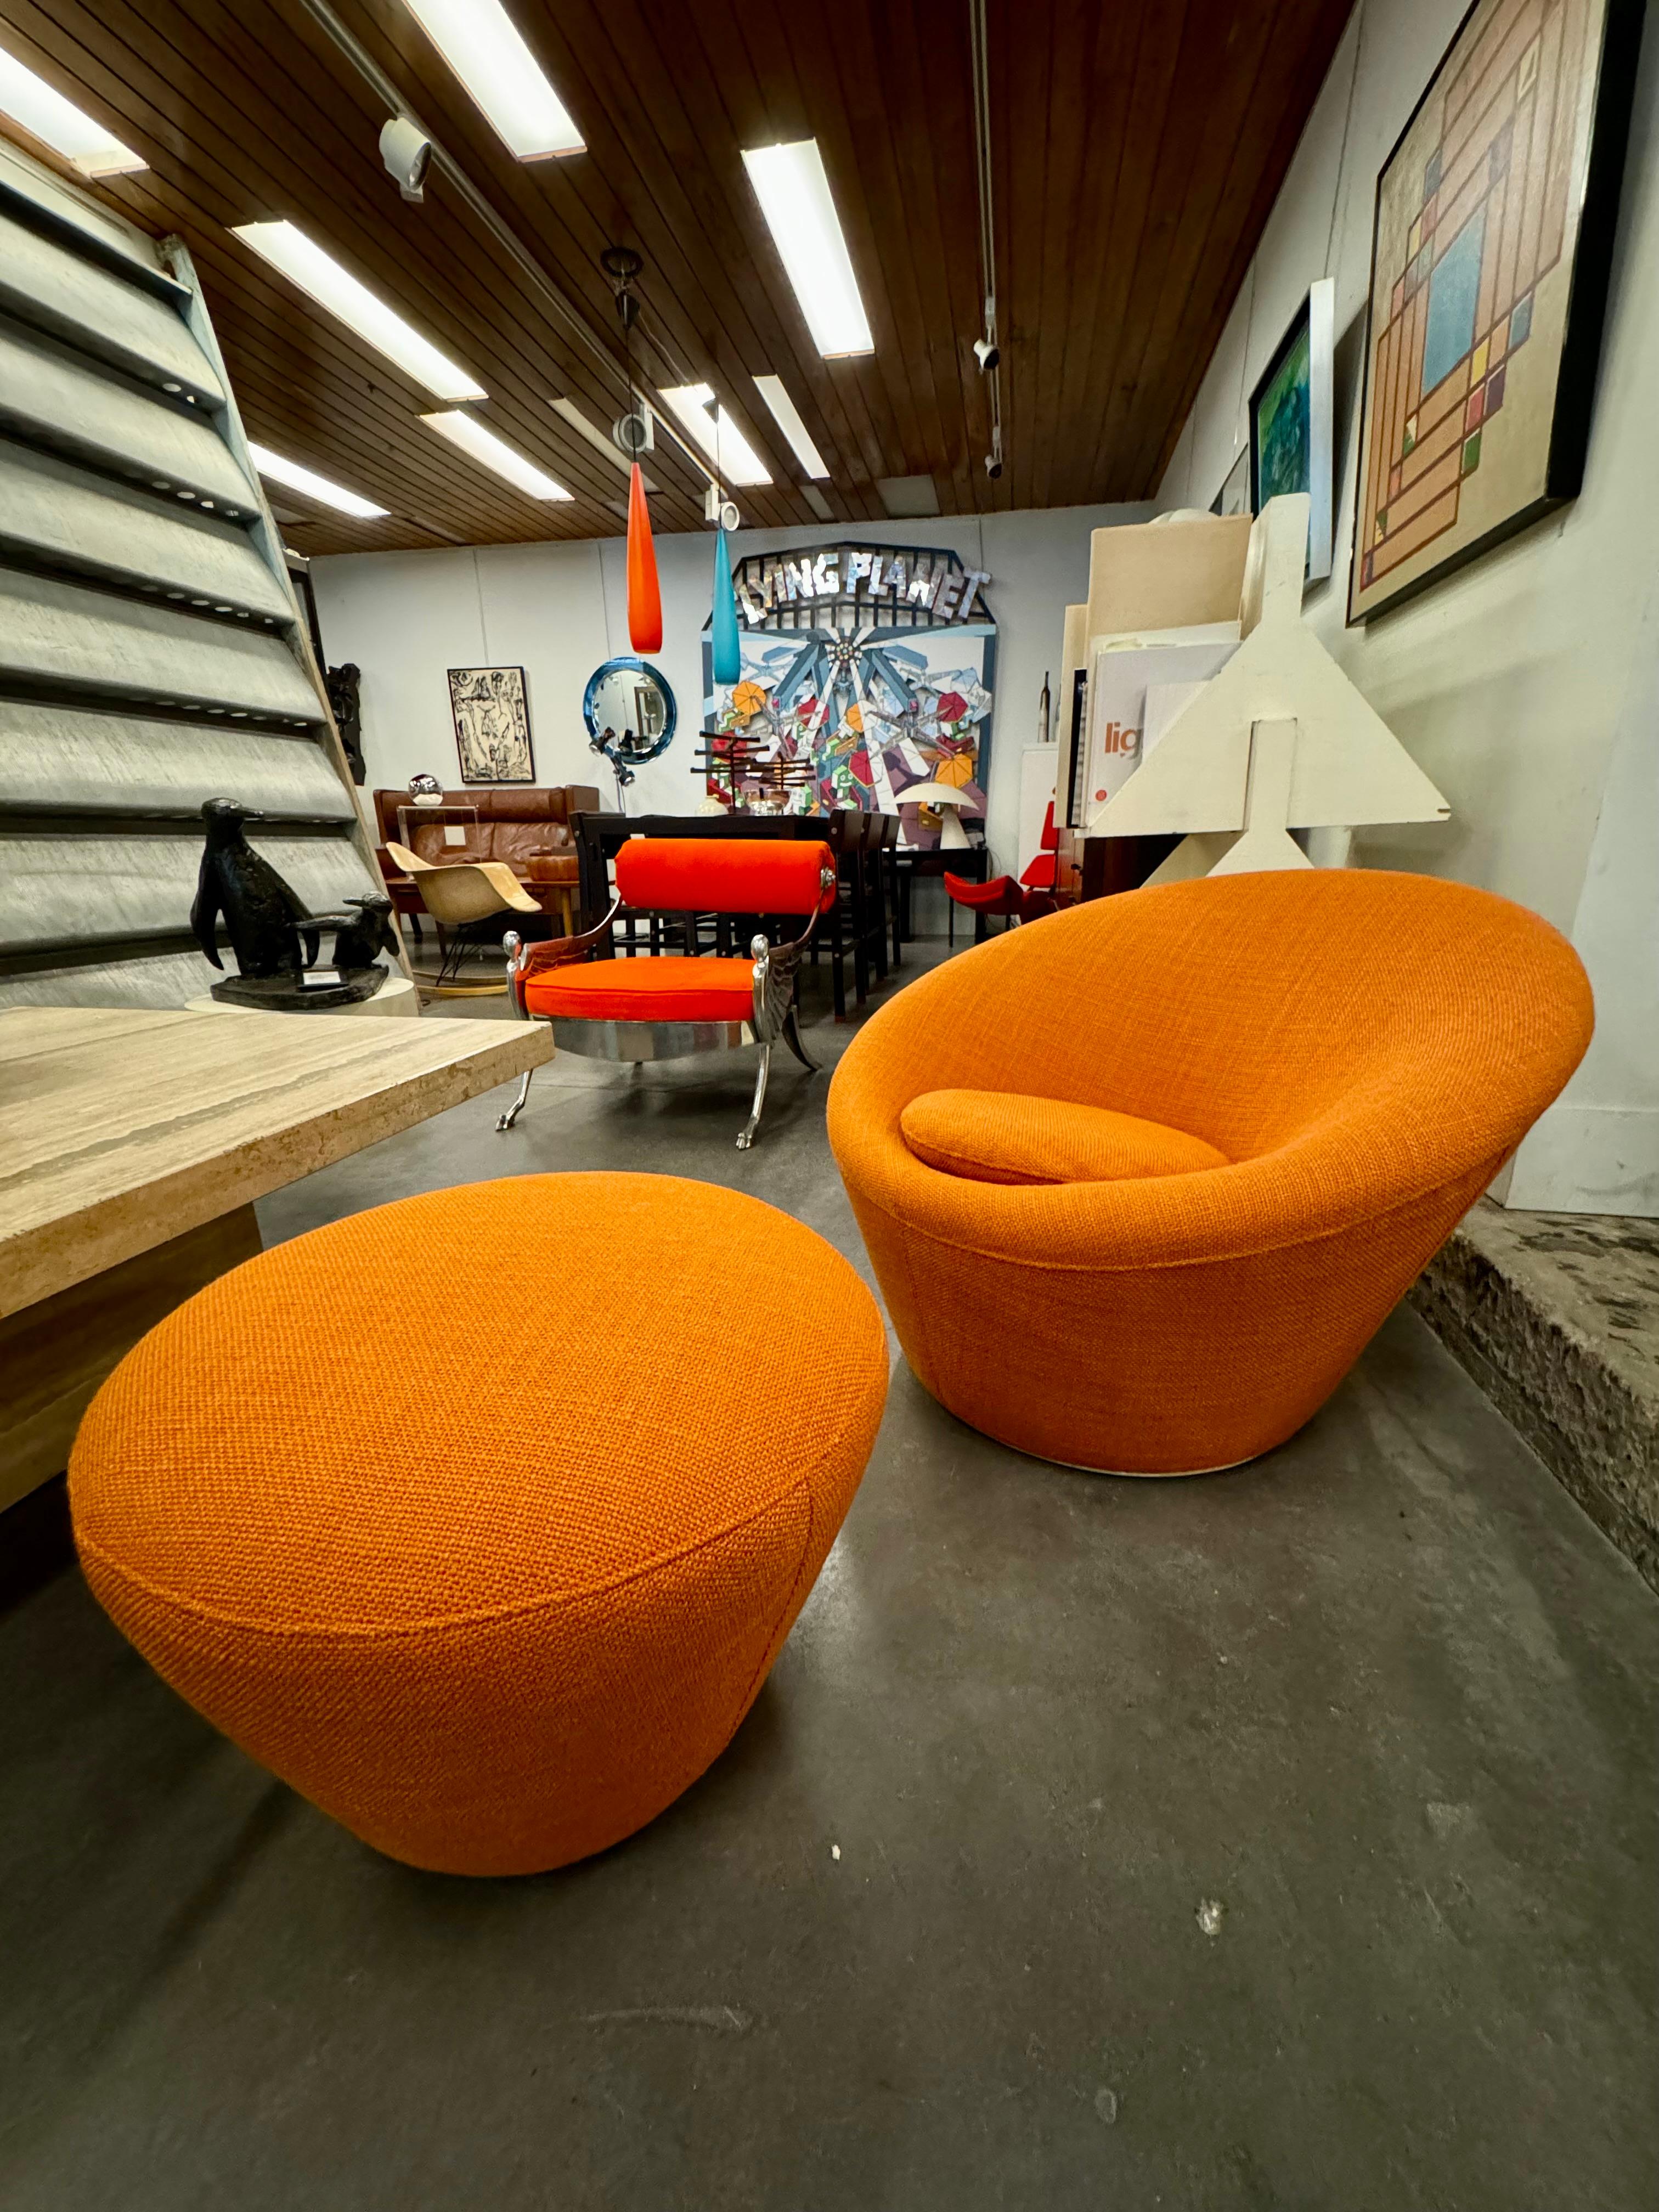 Pierre Paulin f560 called mushroom here is an Armchair and ottoman newly reupholstered in high-quality orange wool fabric 
The Mushroom Armchair, designed by the renowned French designer Pierre Paulin in 1959, exudes timeless elegance. Its